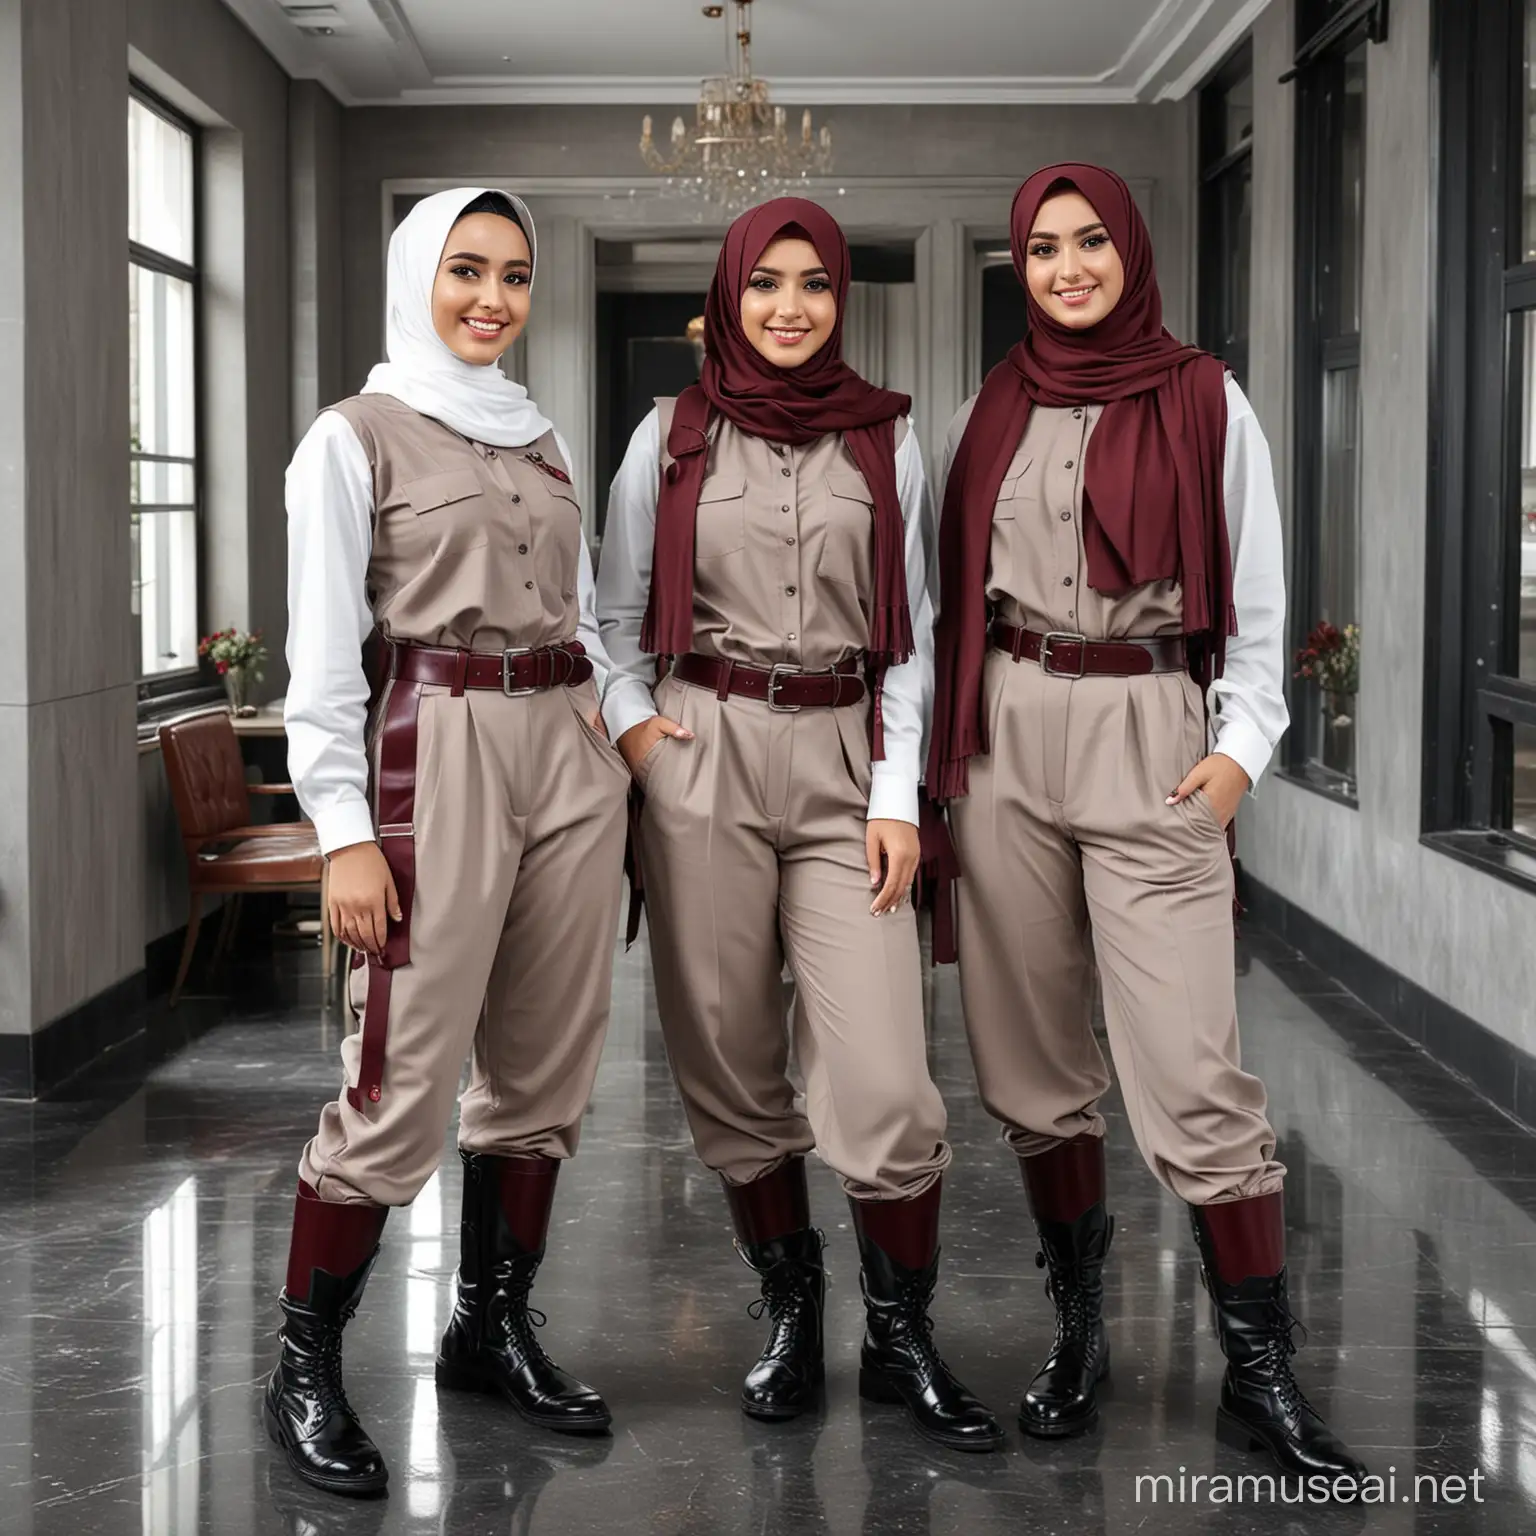 A realistic photo of three hijab-wearing models, pretty girls smiling in PDH uniforms with maroon belts, long pants, black boots, happily posing in a magnificent office room with a reflective floor